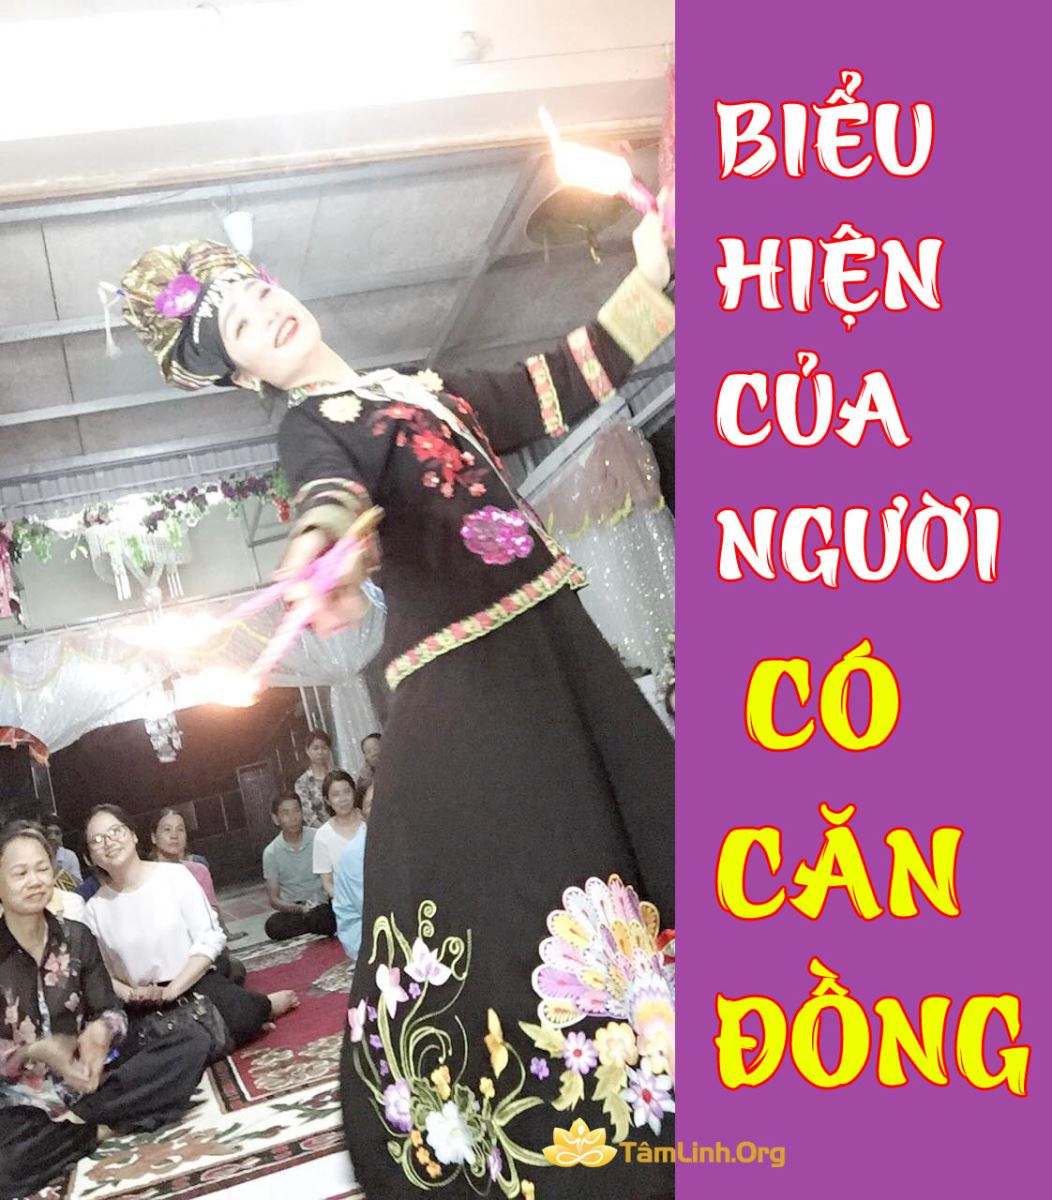 nguoi co can dong, can dong so linh, hau dong